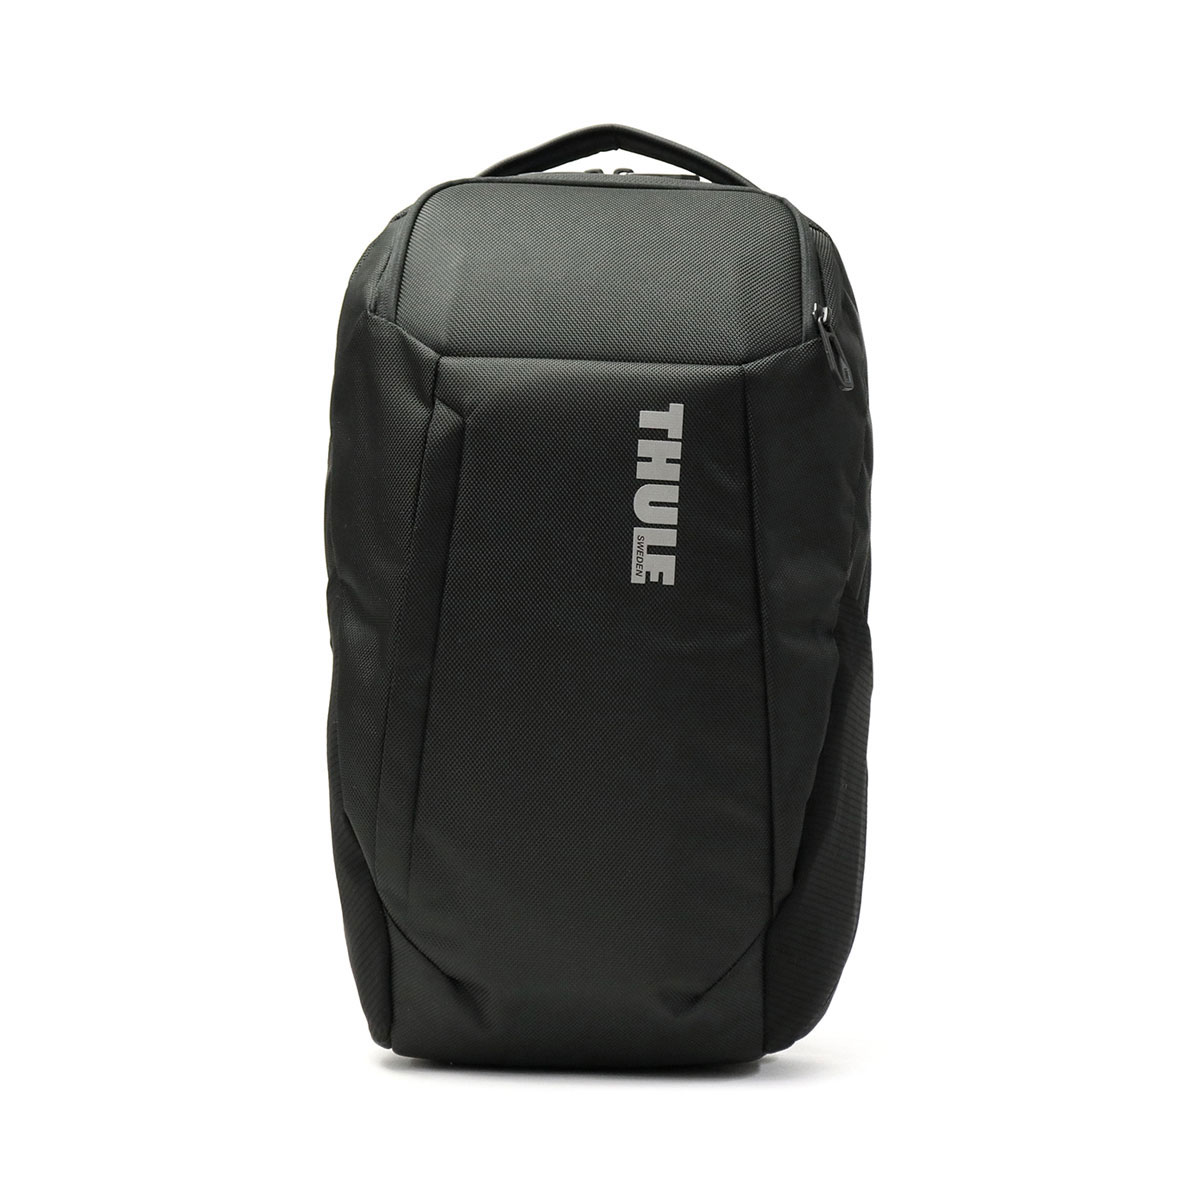 THULE スーリー Thule Accent Backpack バックパック 20L TACBP-115